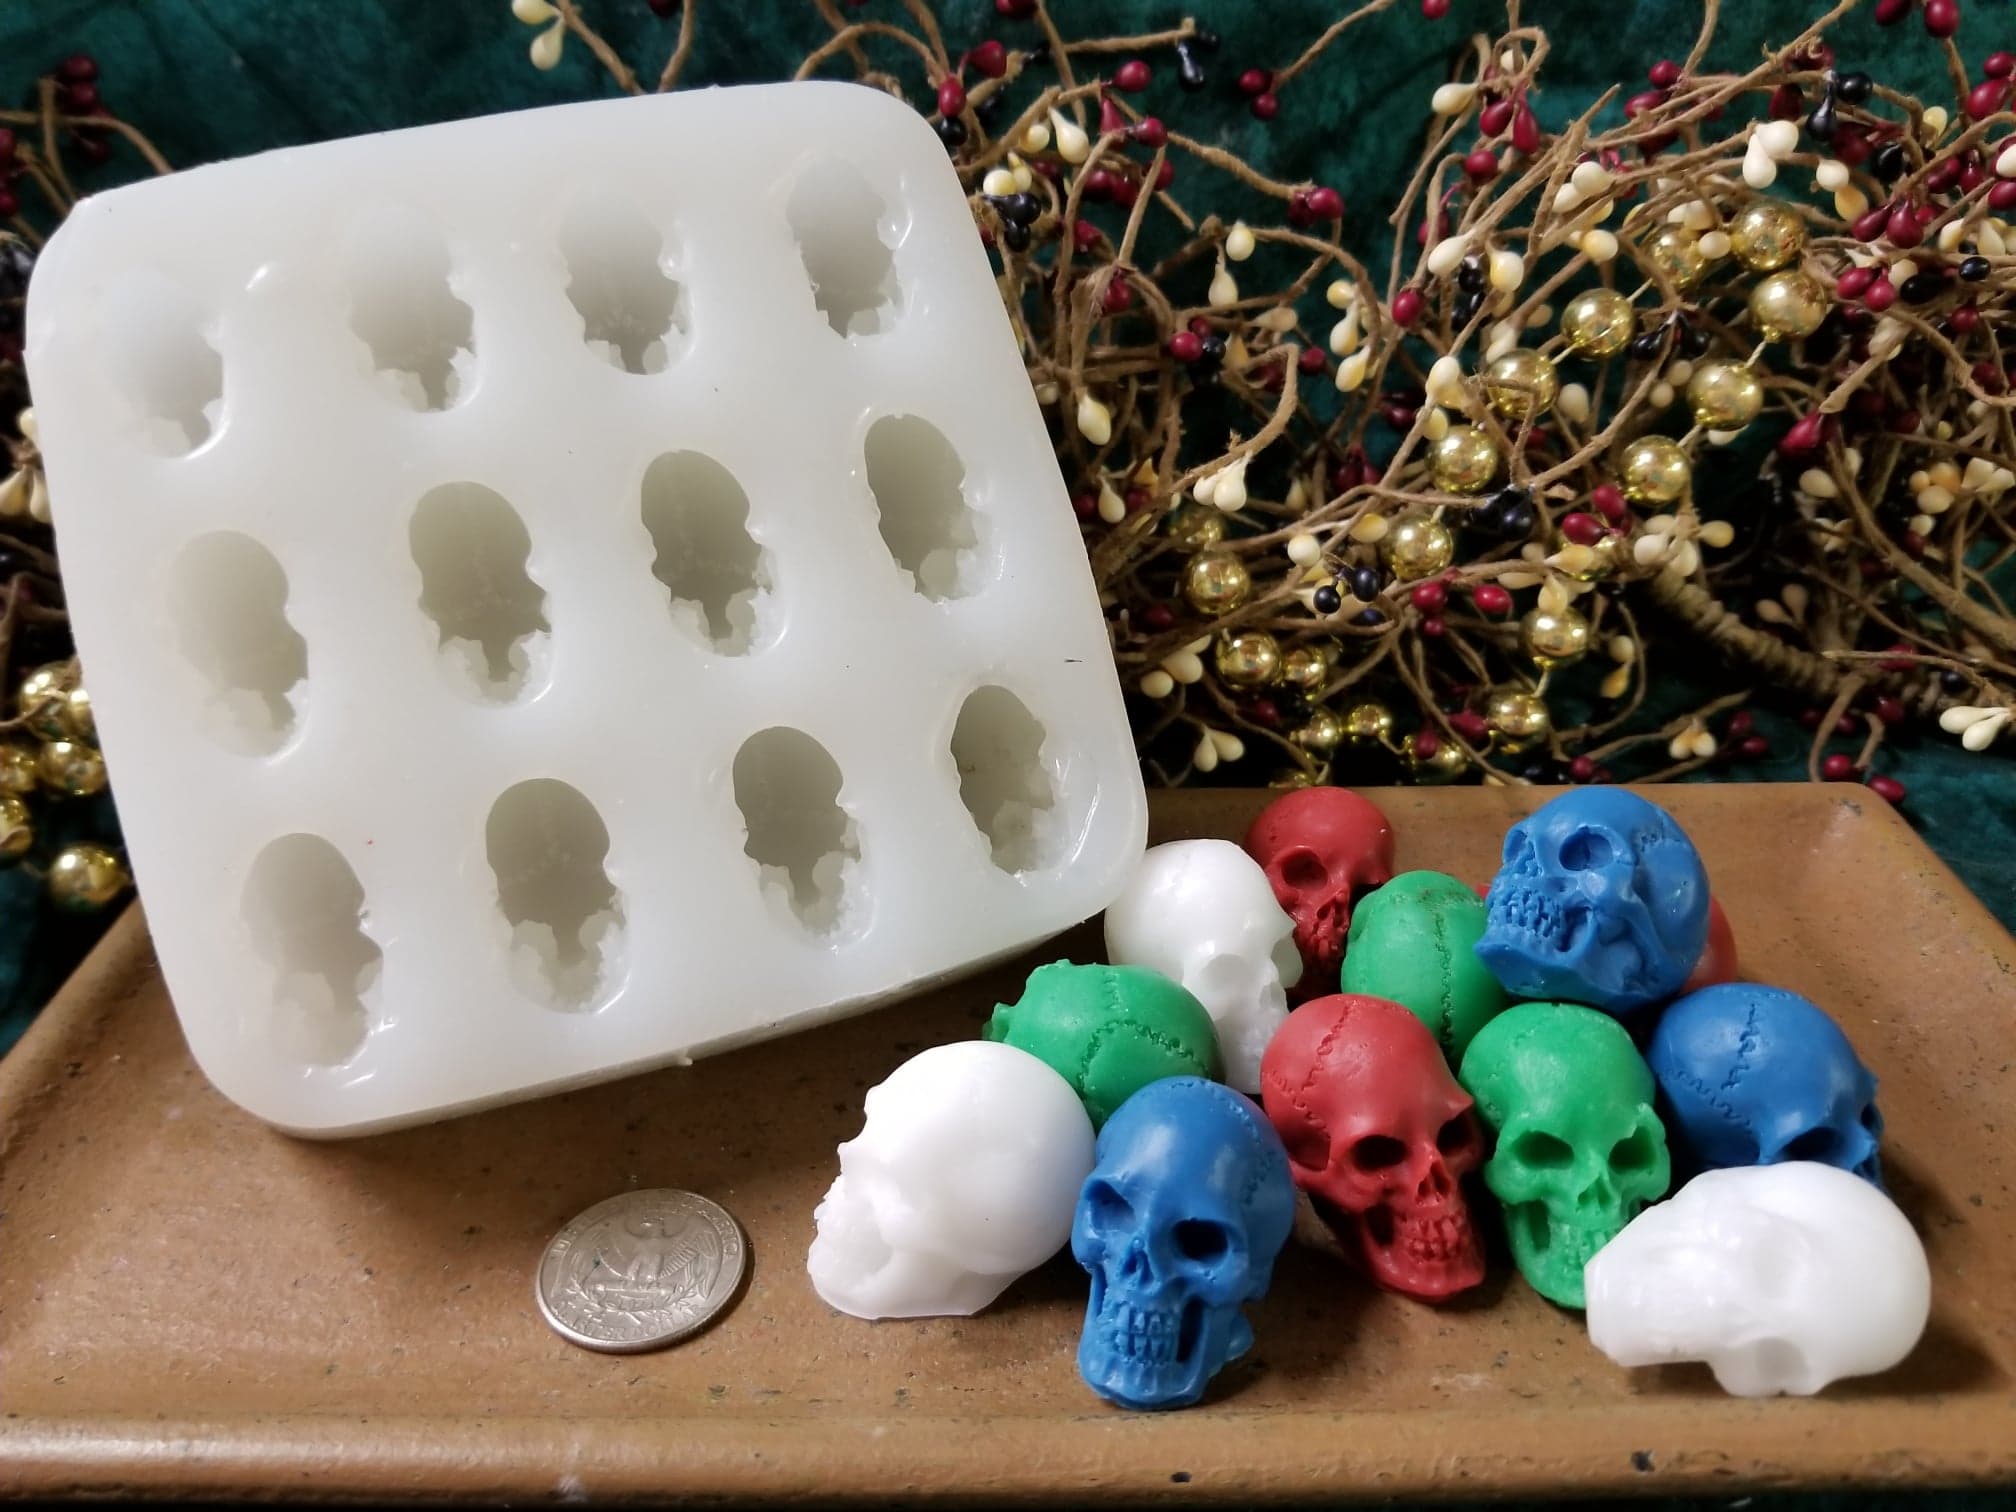 https://www.vanyulay.com/wp-content/uploads/2018/07/Skull-Embed-Silicone-Mold-5532-1.jpg